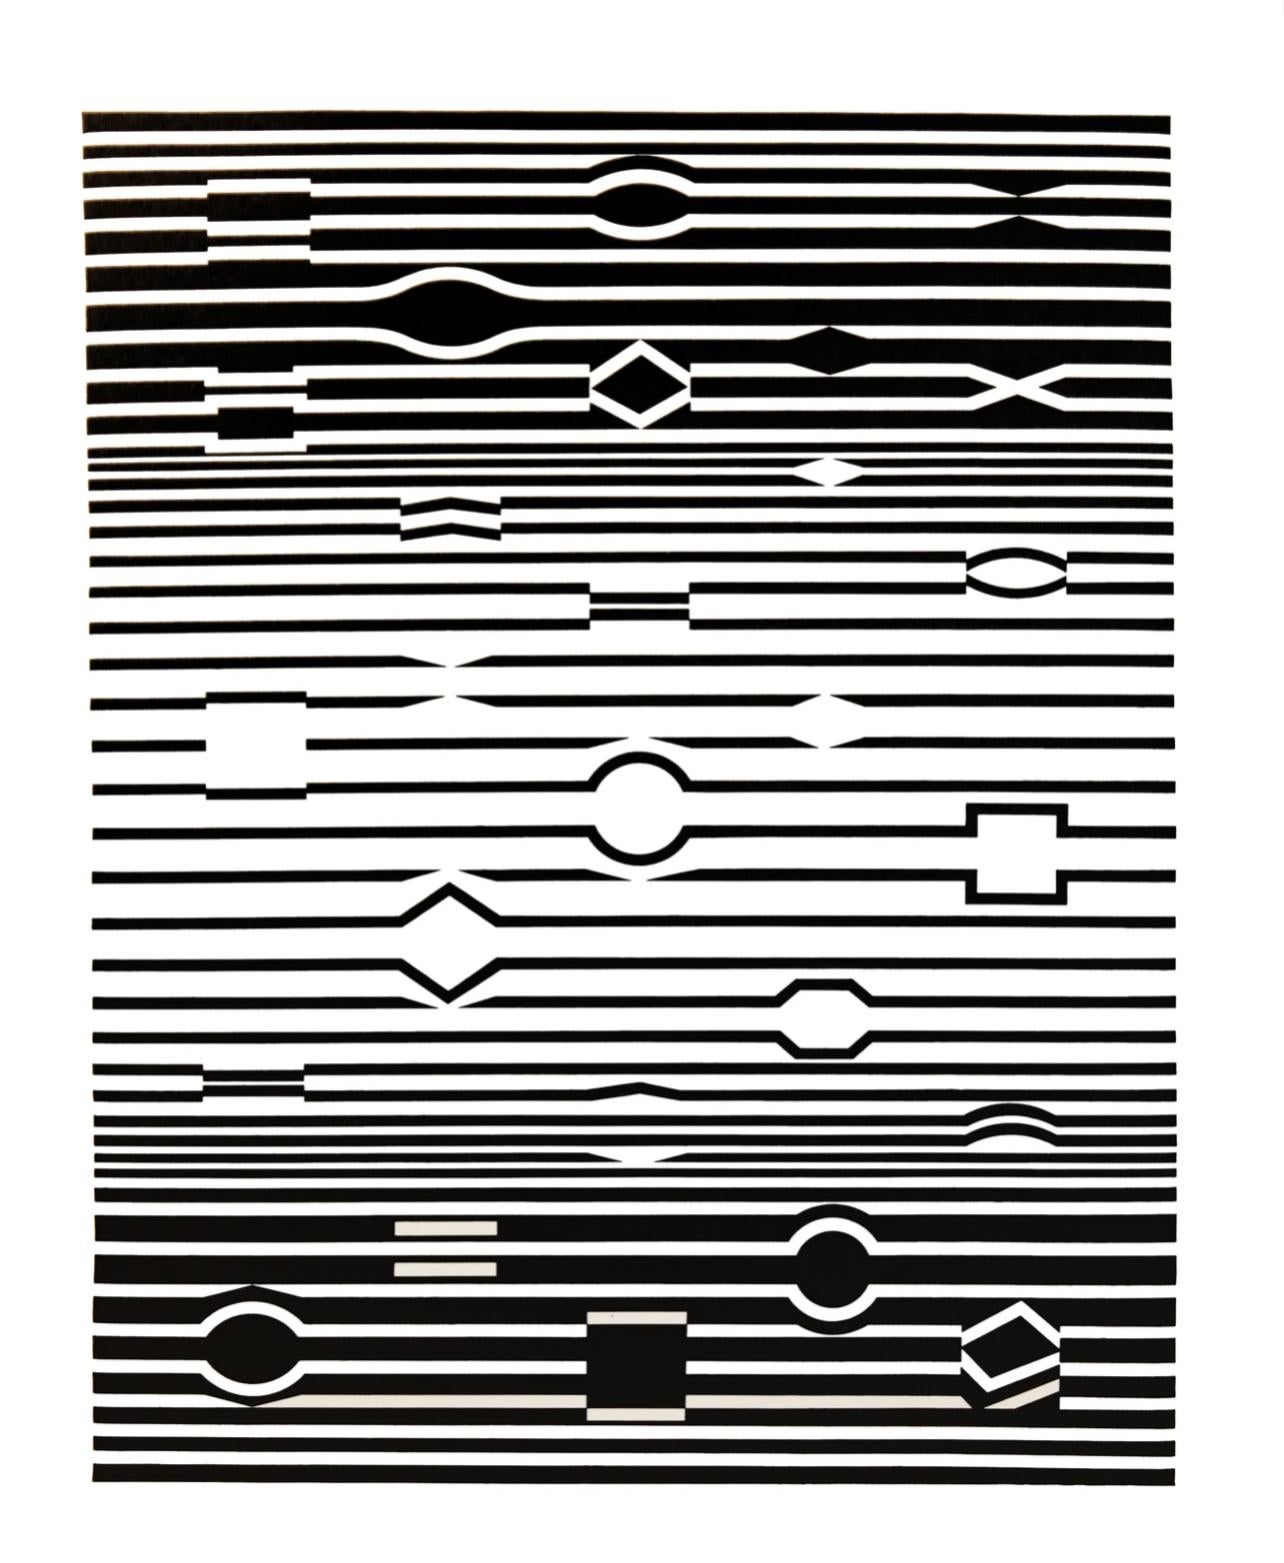 Vasarely, Composition, Ondulatoires (after) - Print by Victor Vasarely